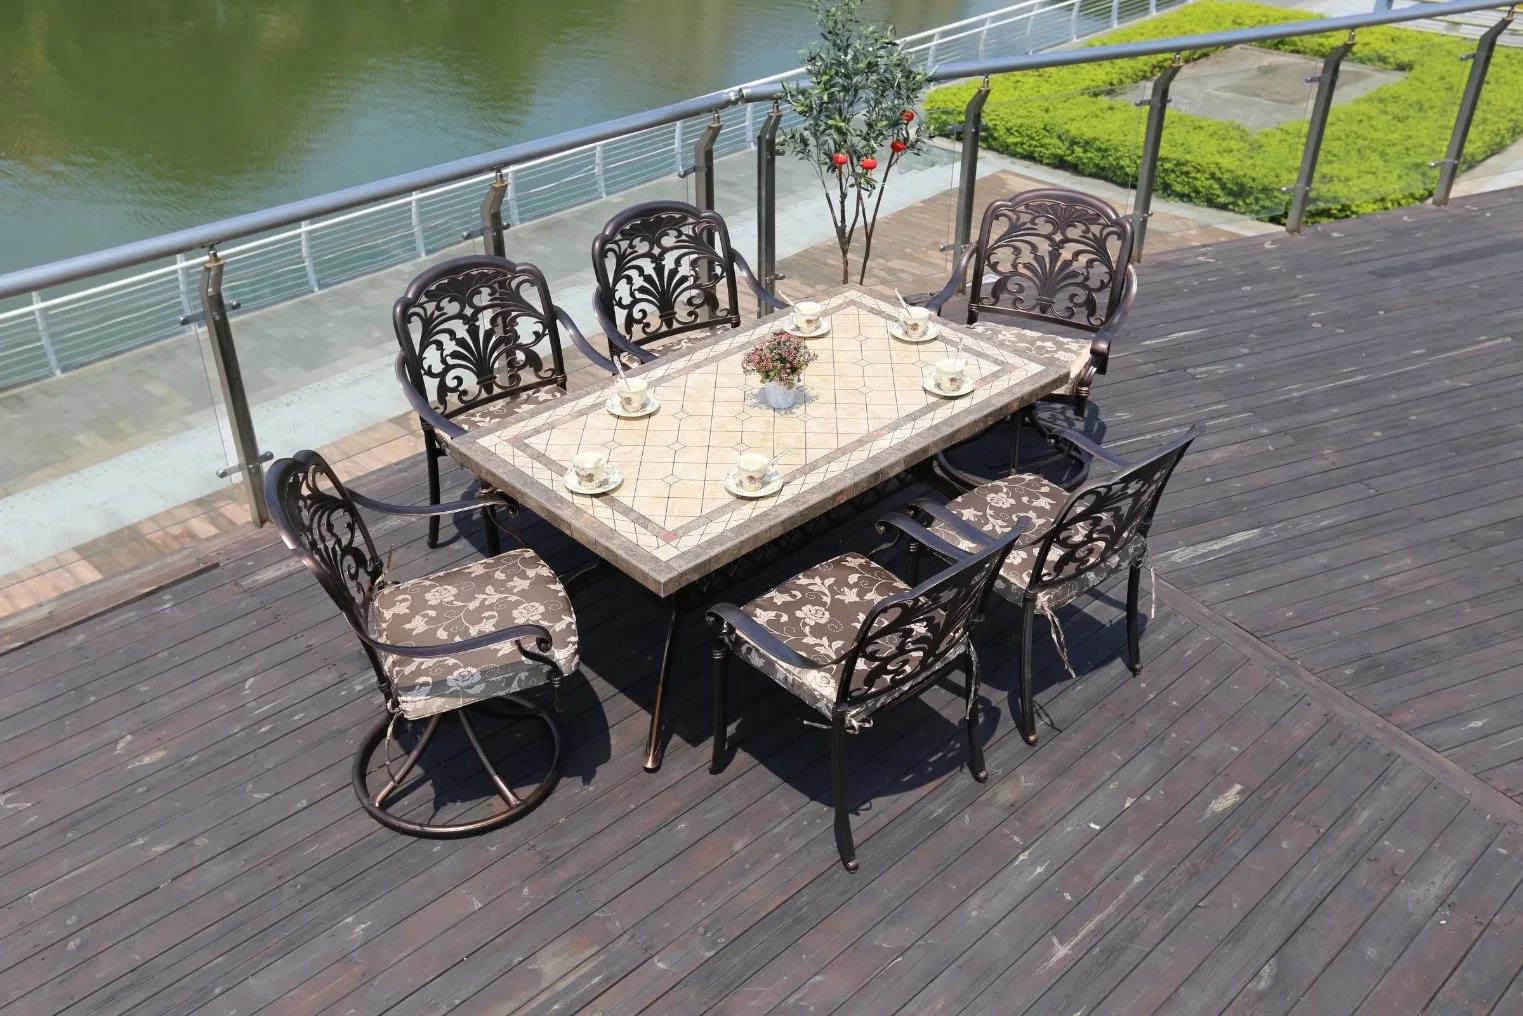 Outdoor Garden Barbecue Tables and Chairs and Home Garden Villa Cast Aluminum Furniture Ceramic Tile Long Balcony